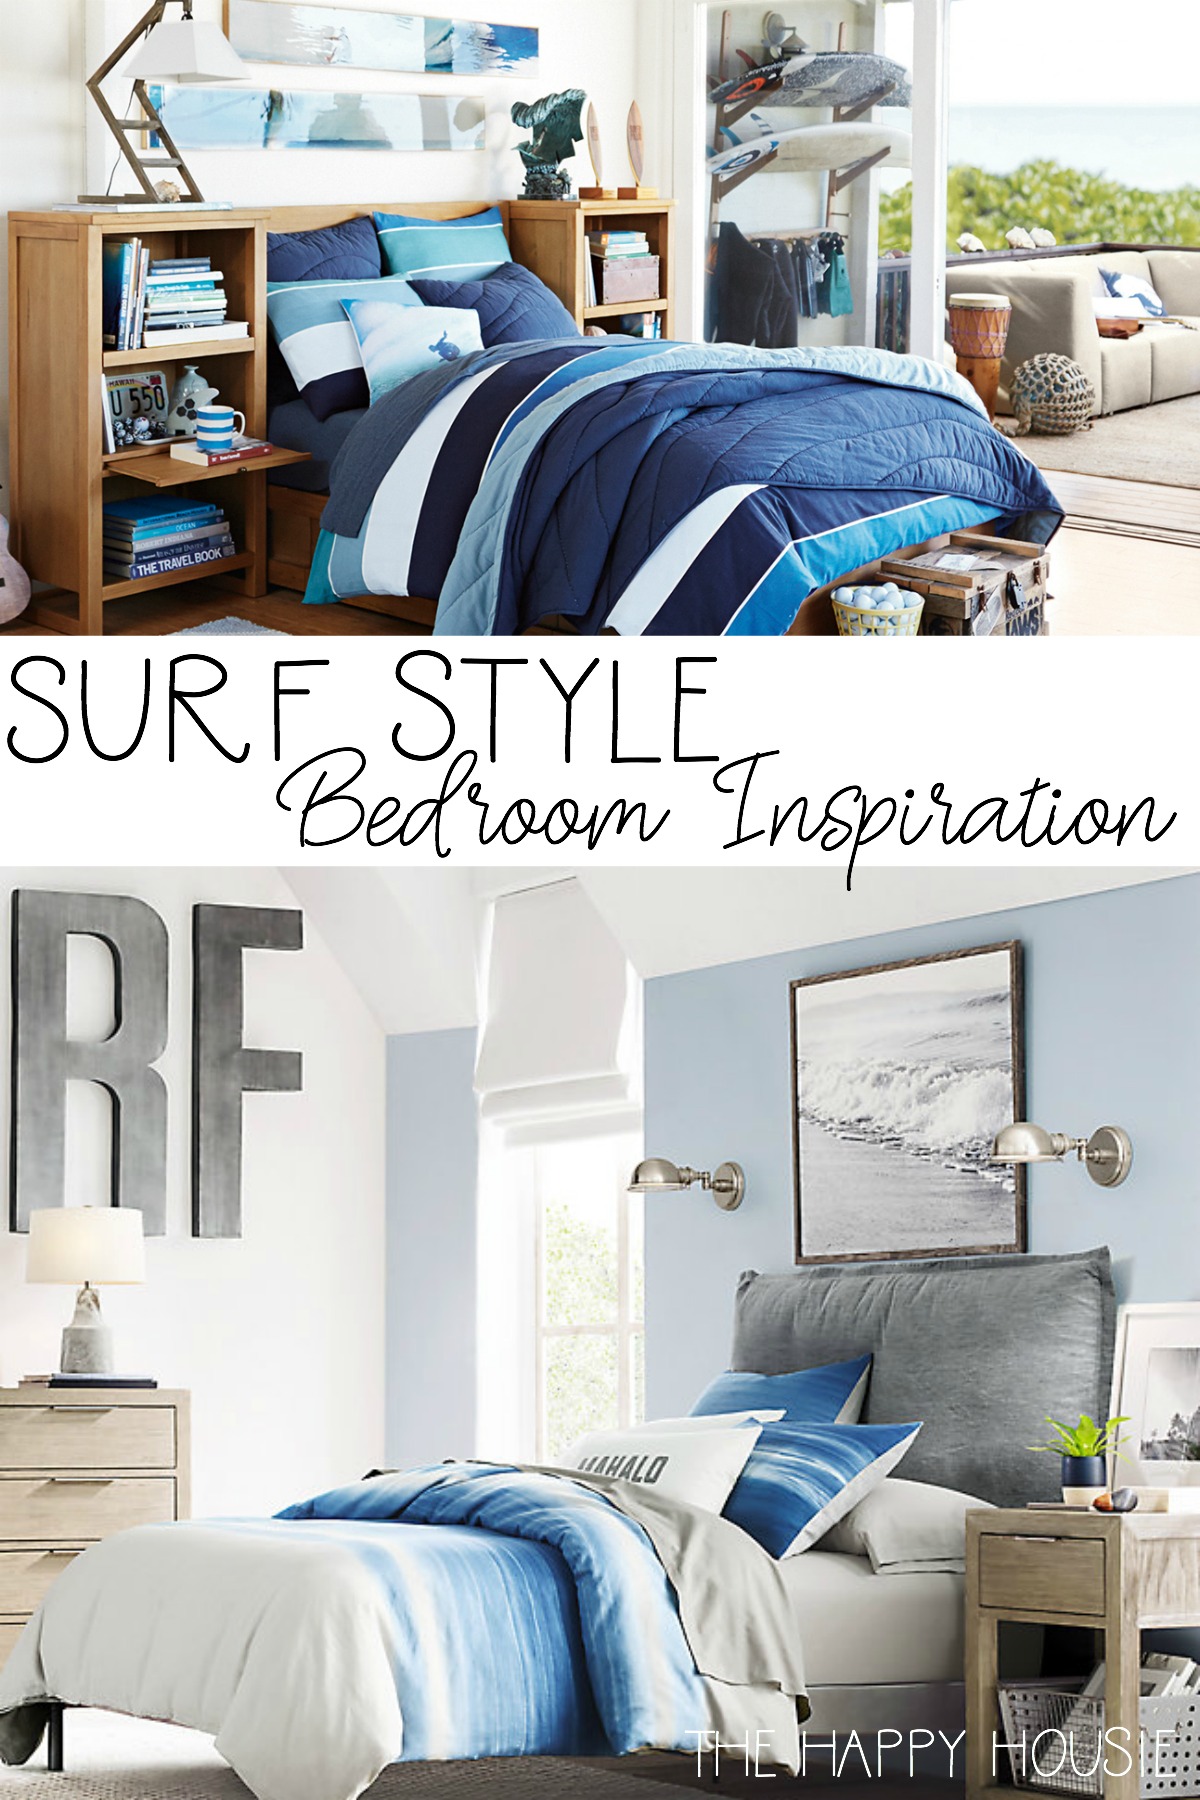 Surf Style Bedroom Inspiration poster.